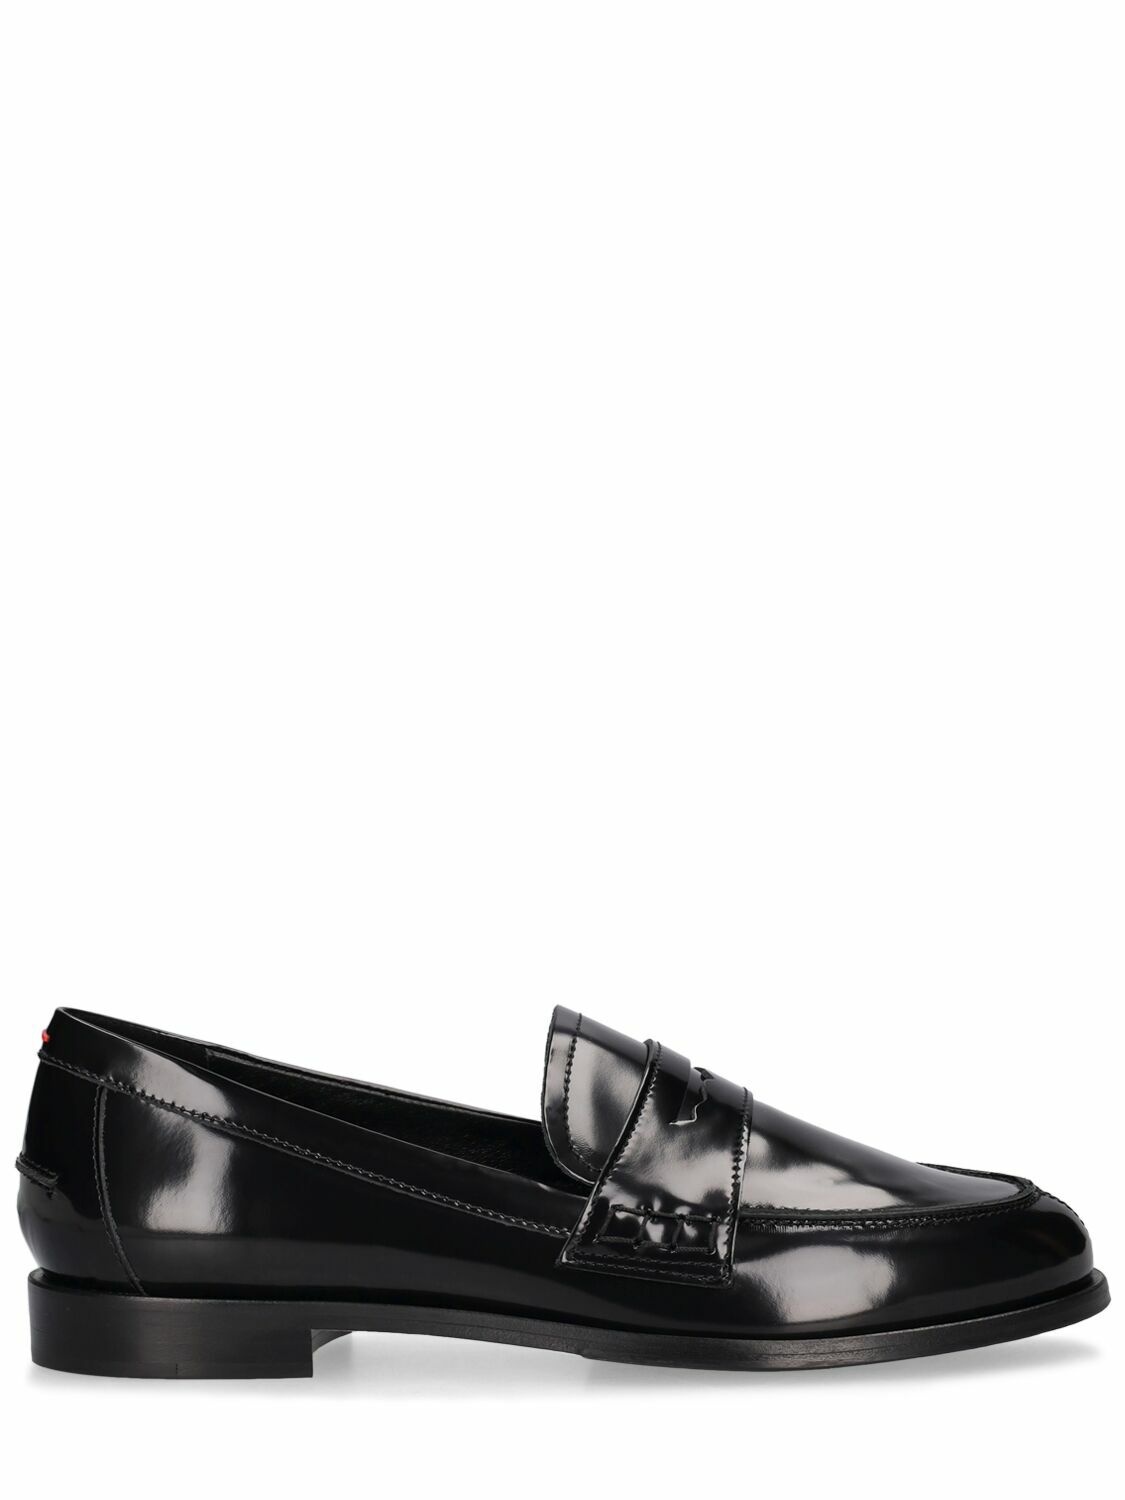 Photo: AEYDE - 15mm Oscar Polido Leather Loafers